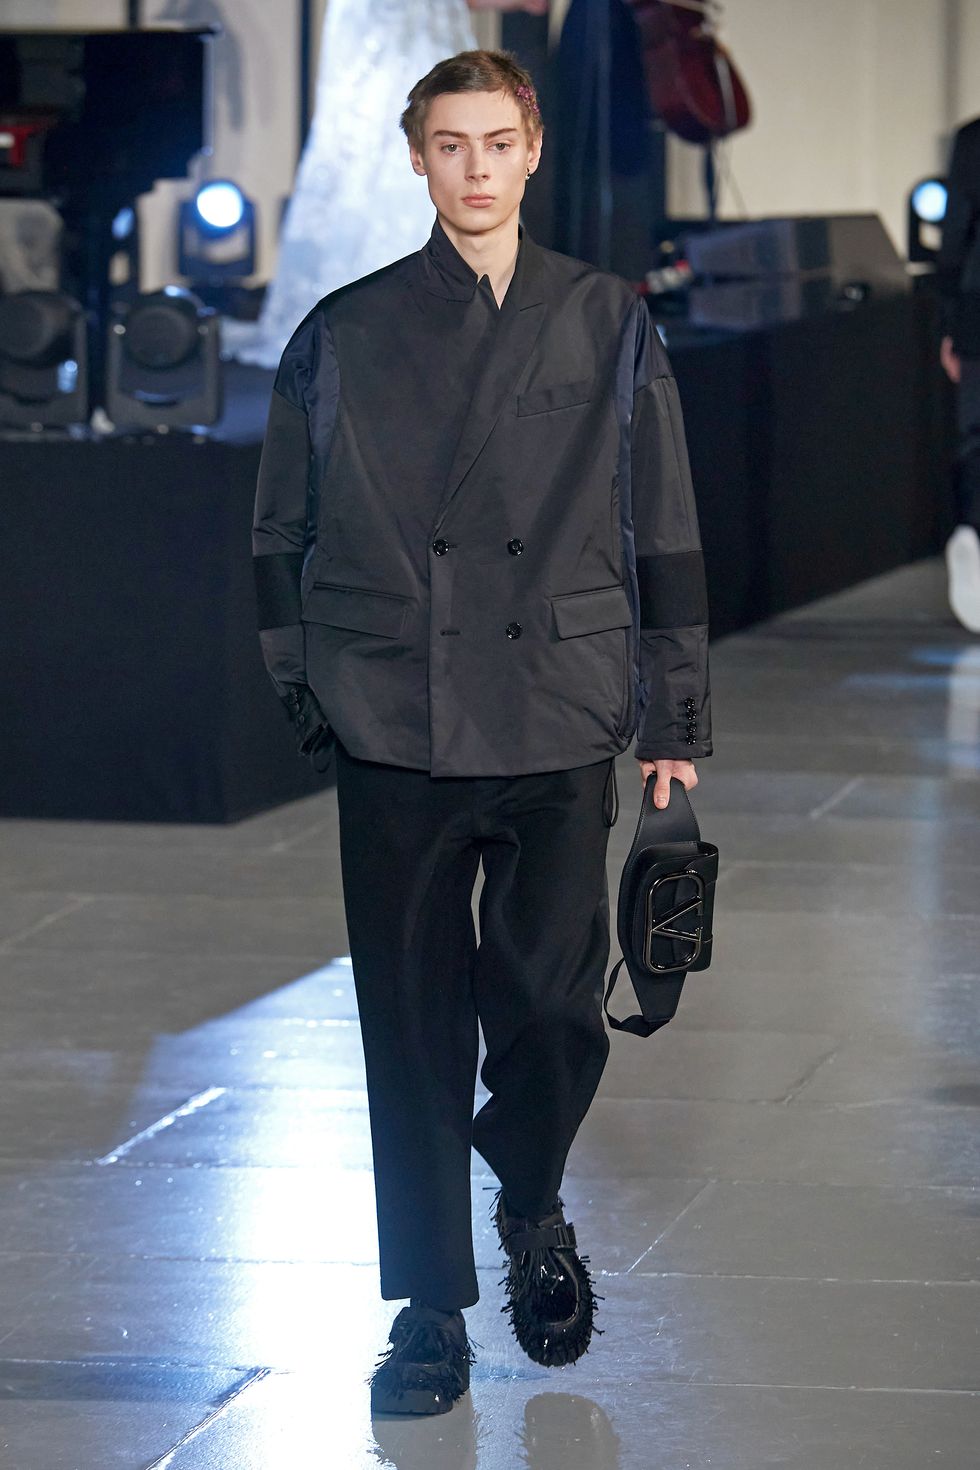 10 Top Fall 2020 Trends From the Men's Collections - PAPER